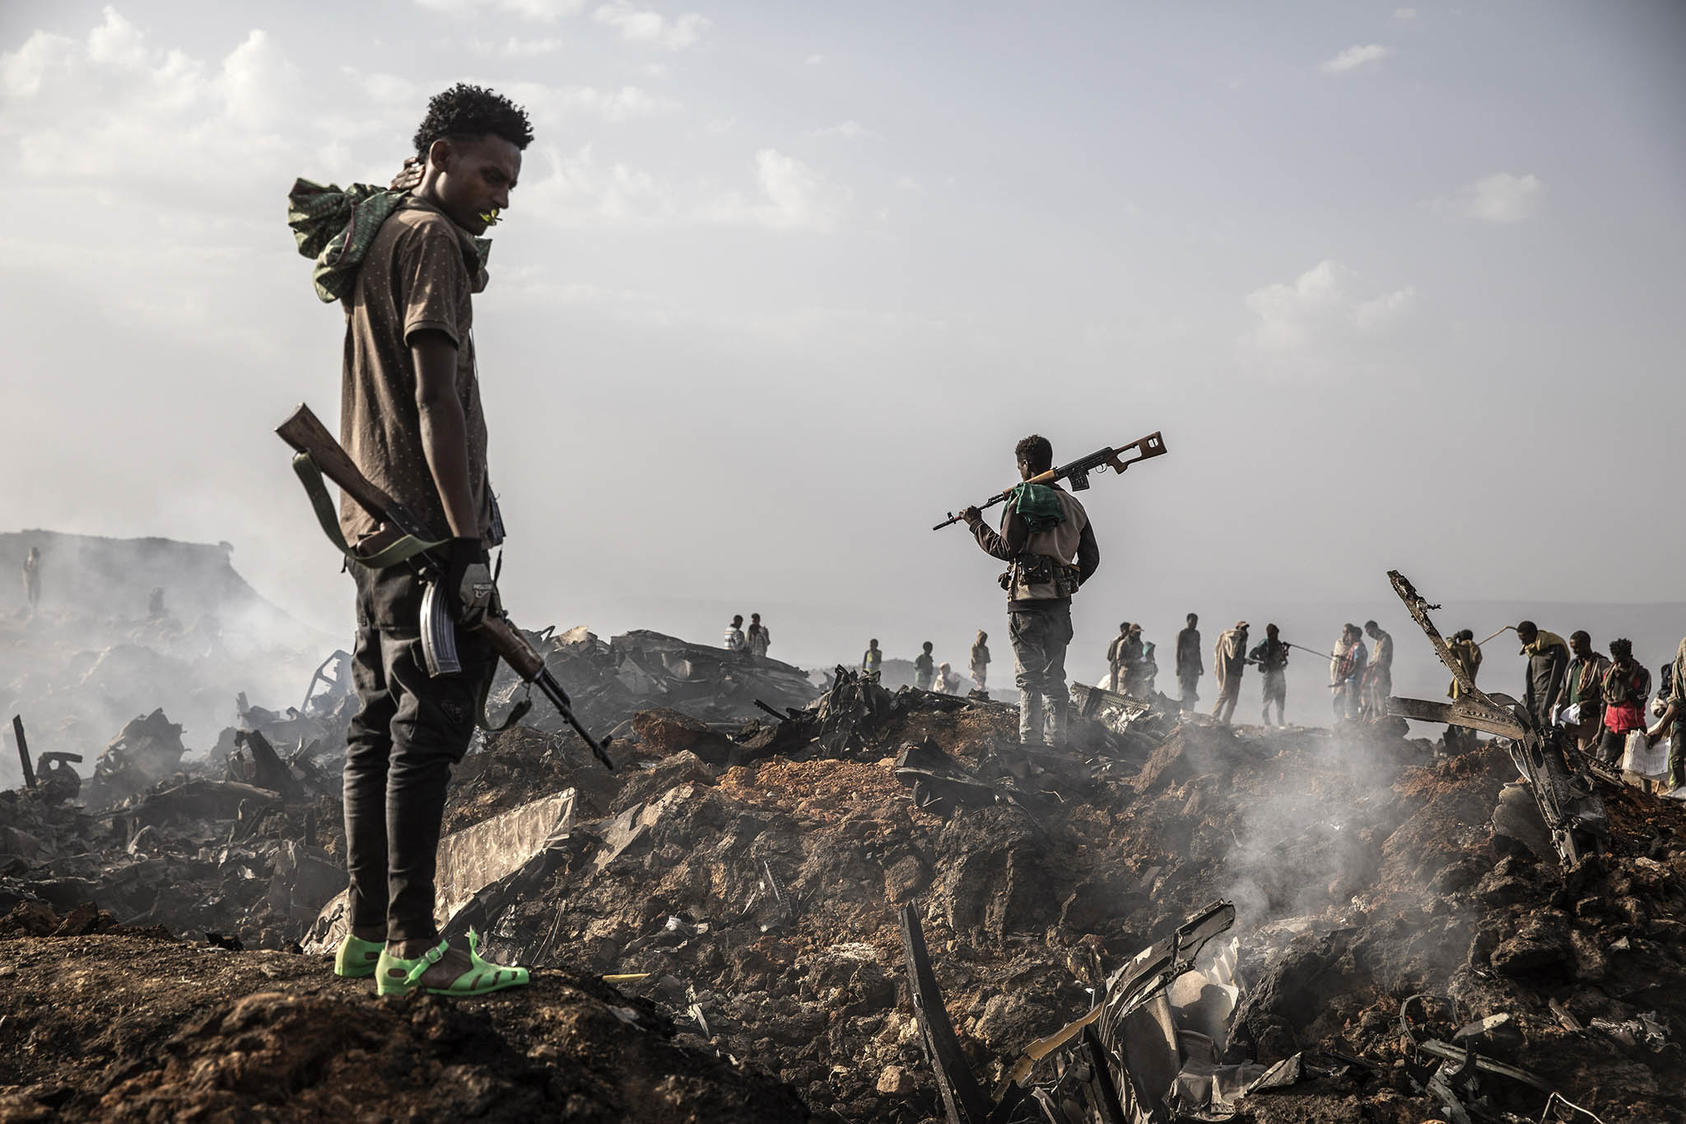 Tigray Defense Force fighters survey the wreckage of an Ethiopian Air Force plane downed in Mekelle, Ethiopia, June 23, 2021. (Finbarr O'Reilly/The New York Times)